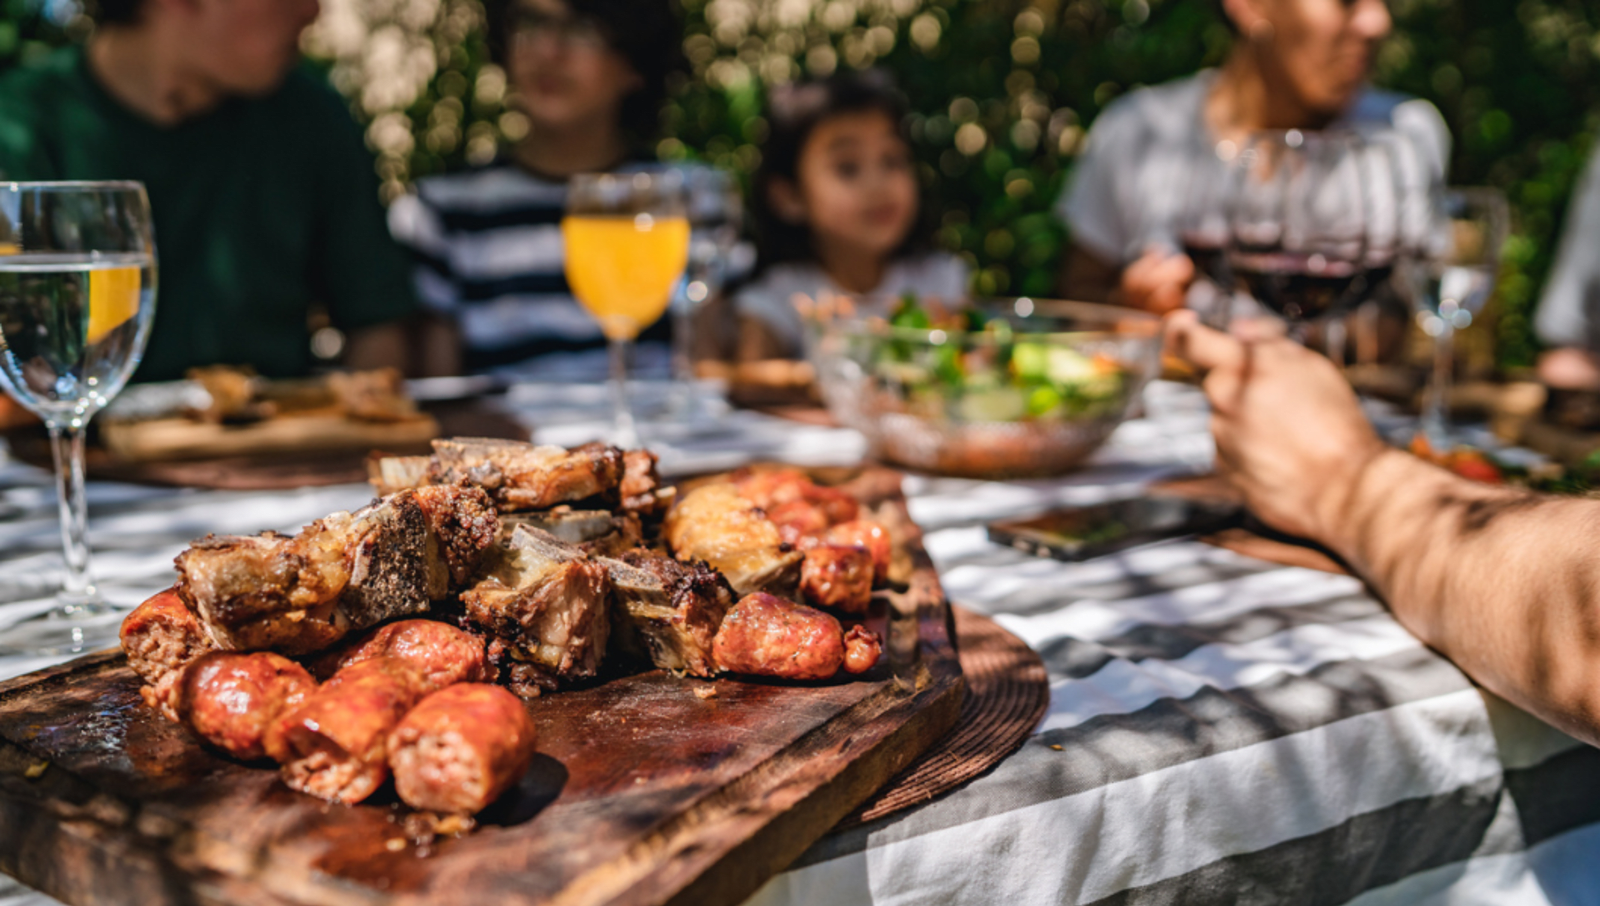 Grilled meat on a board on table with family sitting around